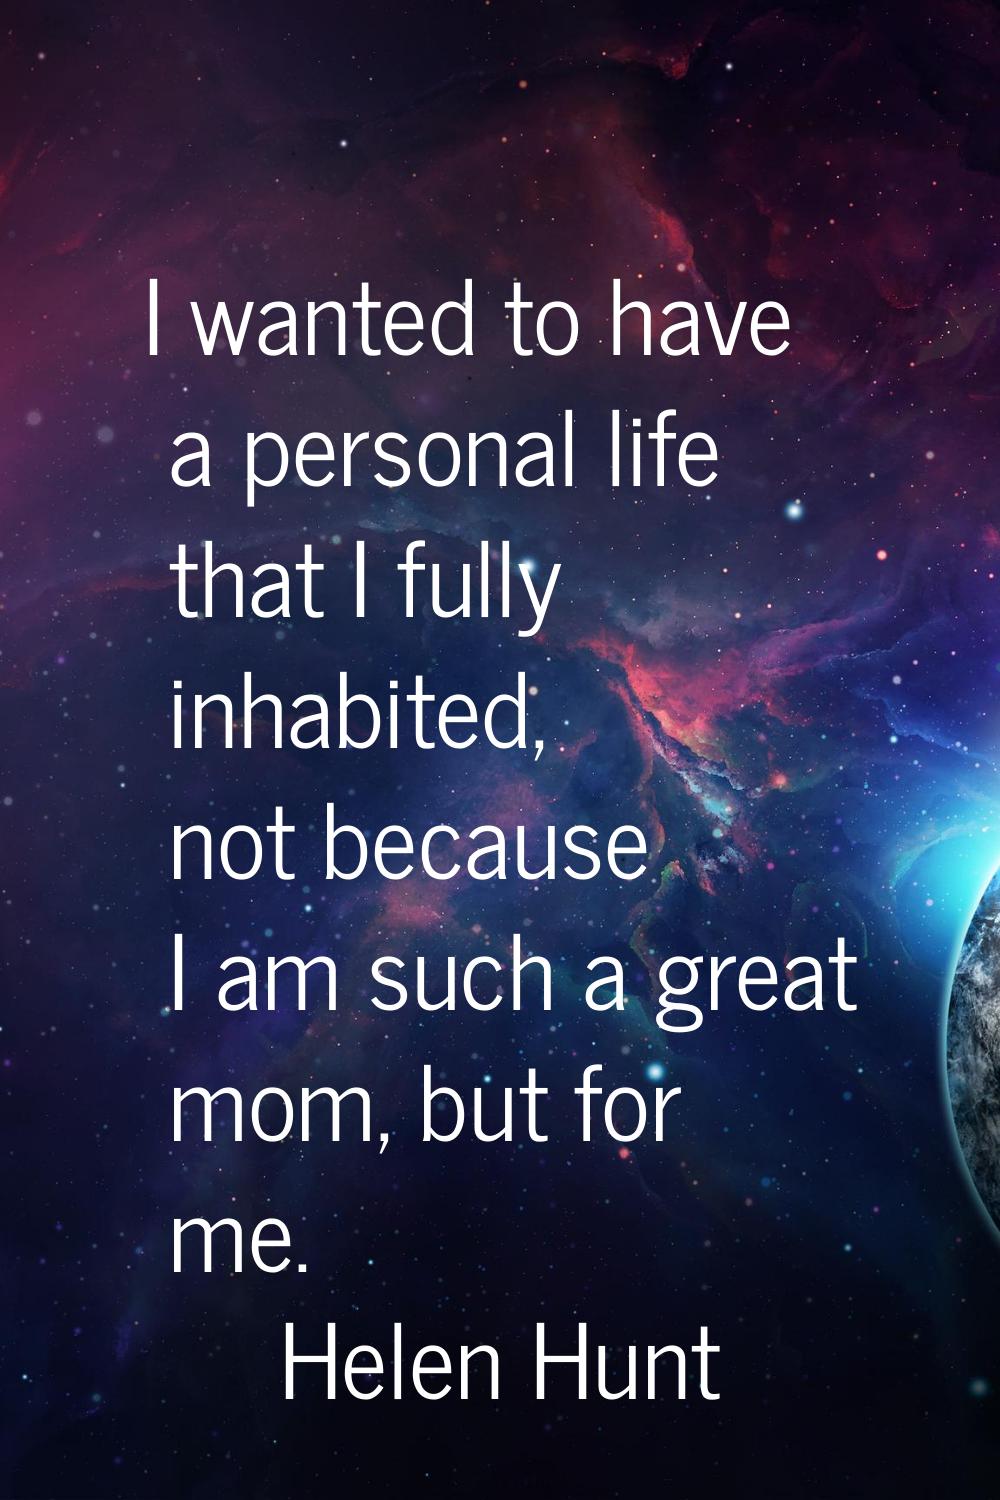 I wanted to have a personal life that I fully inhabited, not because I am such a great mom, but for